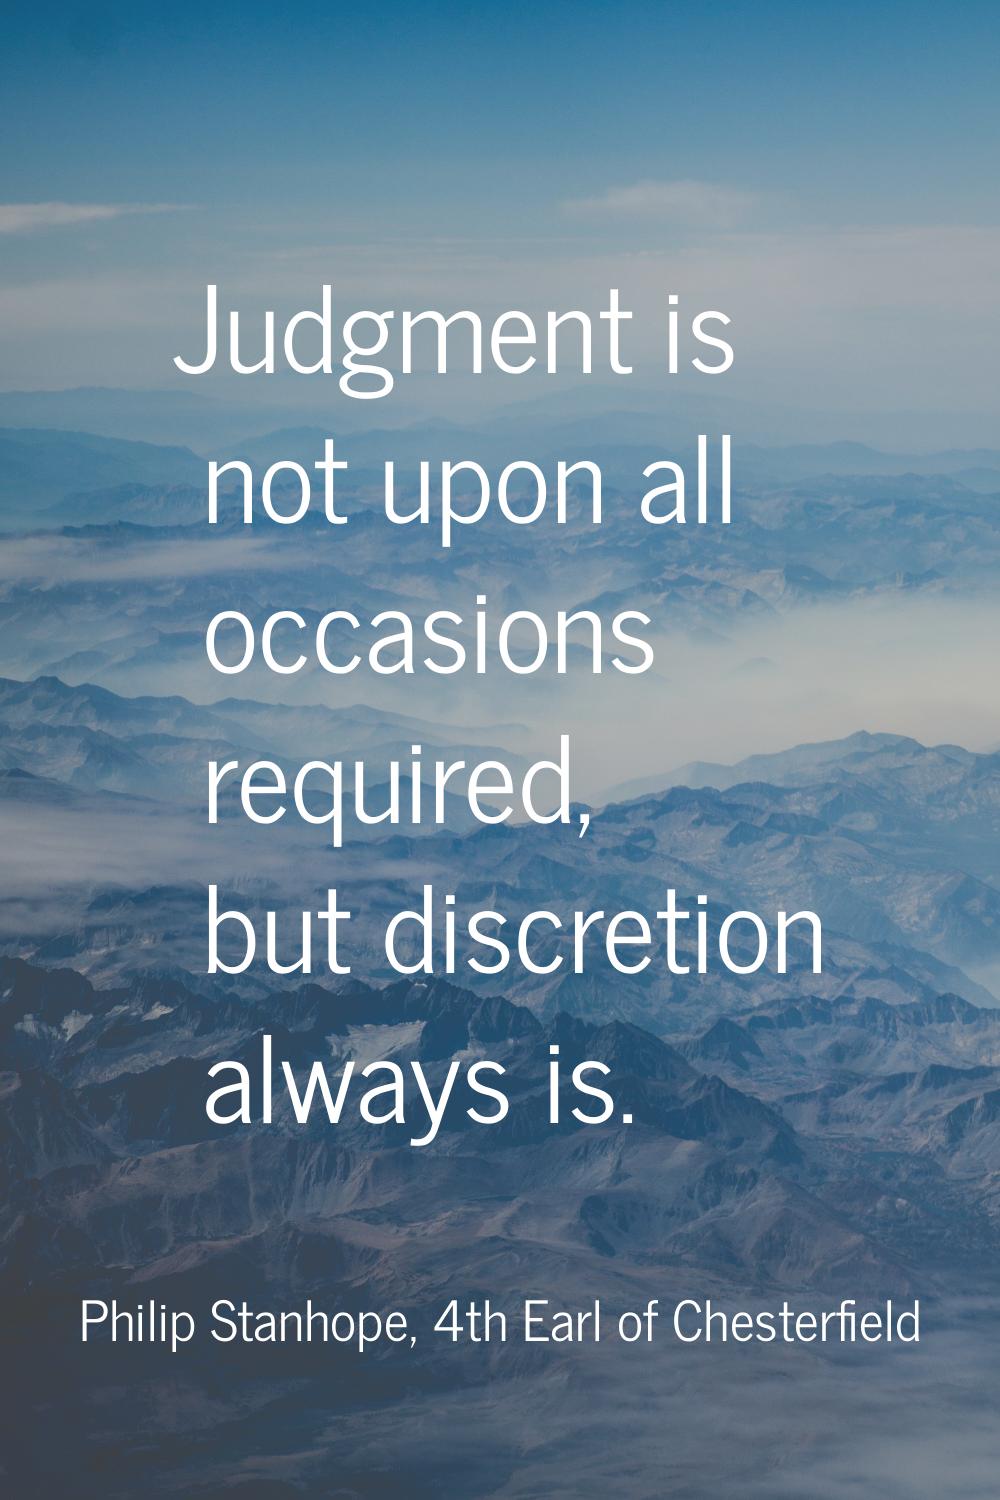 Judgment is not upon all occasions required, but discretion always is.